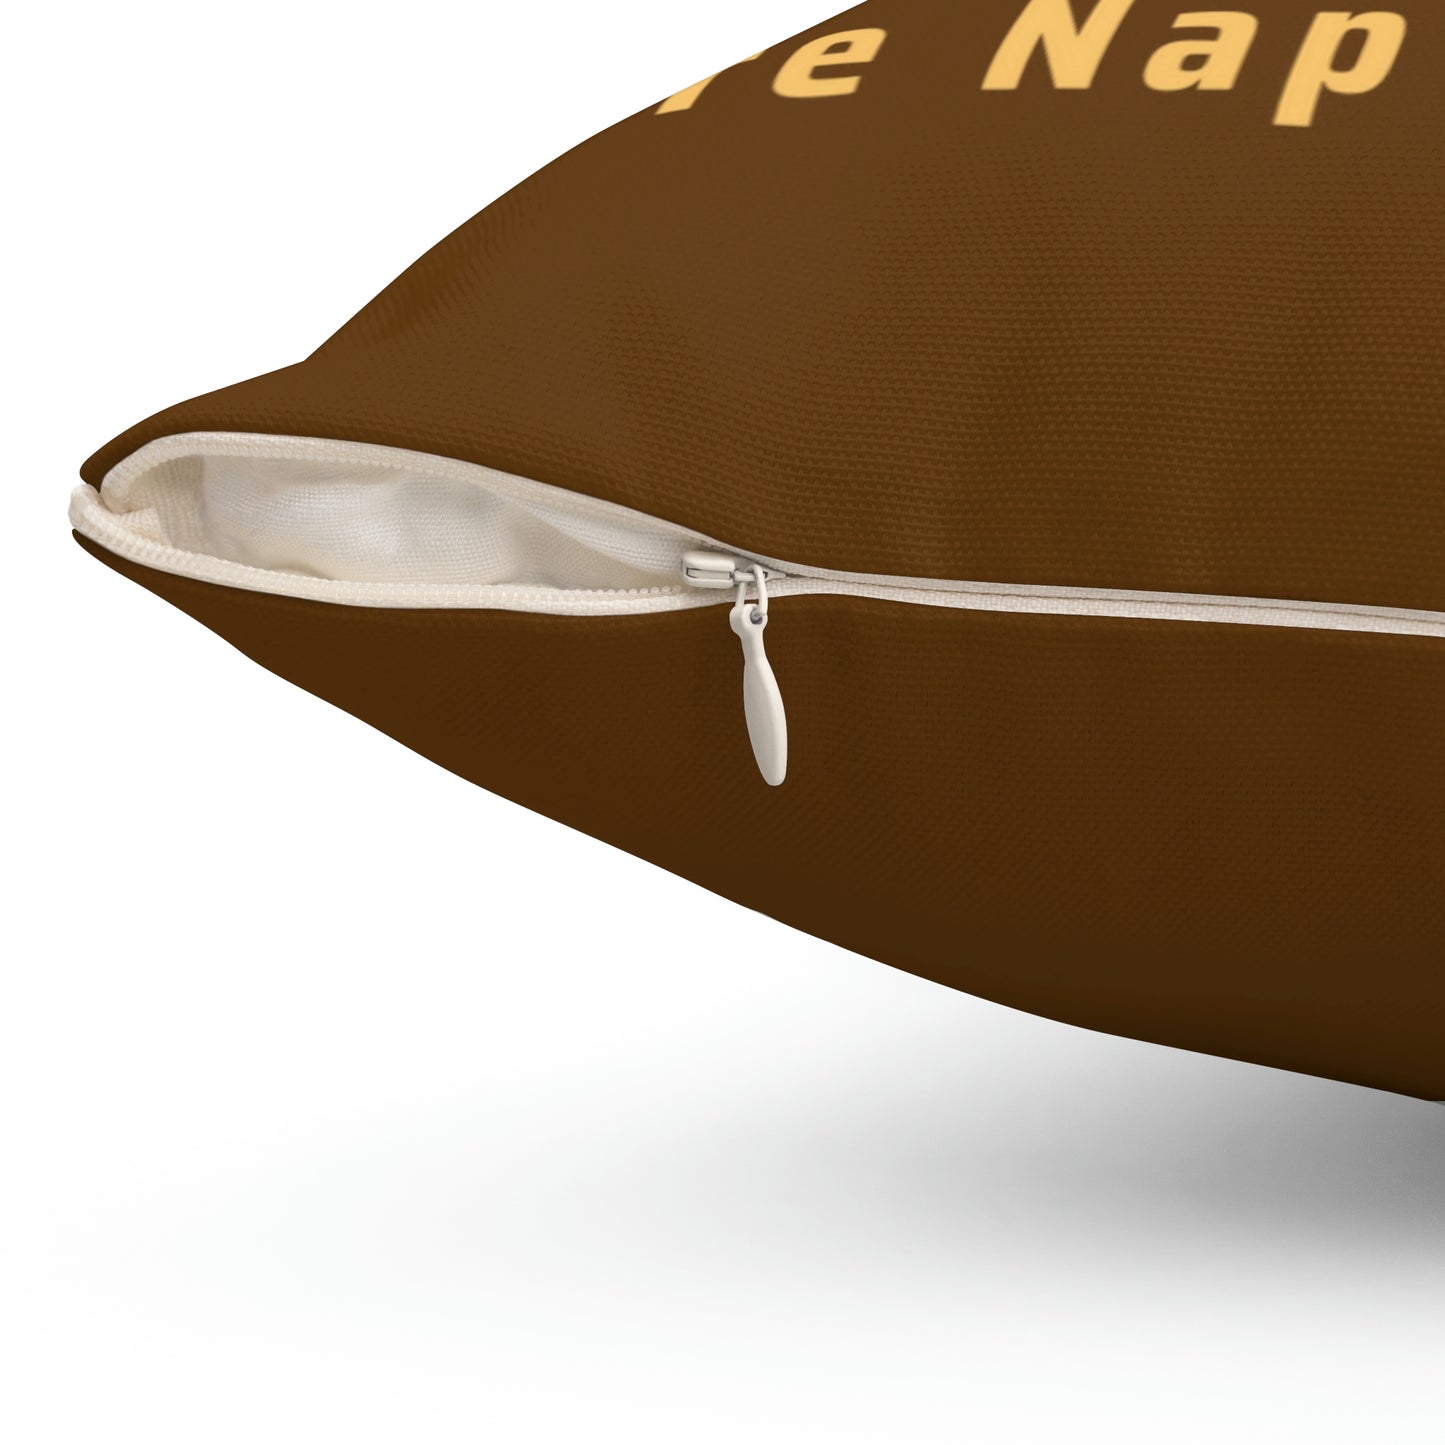 The Best Pre Nap Workout Spun Polyester Square Pillow | Happy Cat Pillow